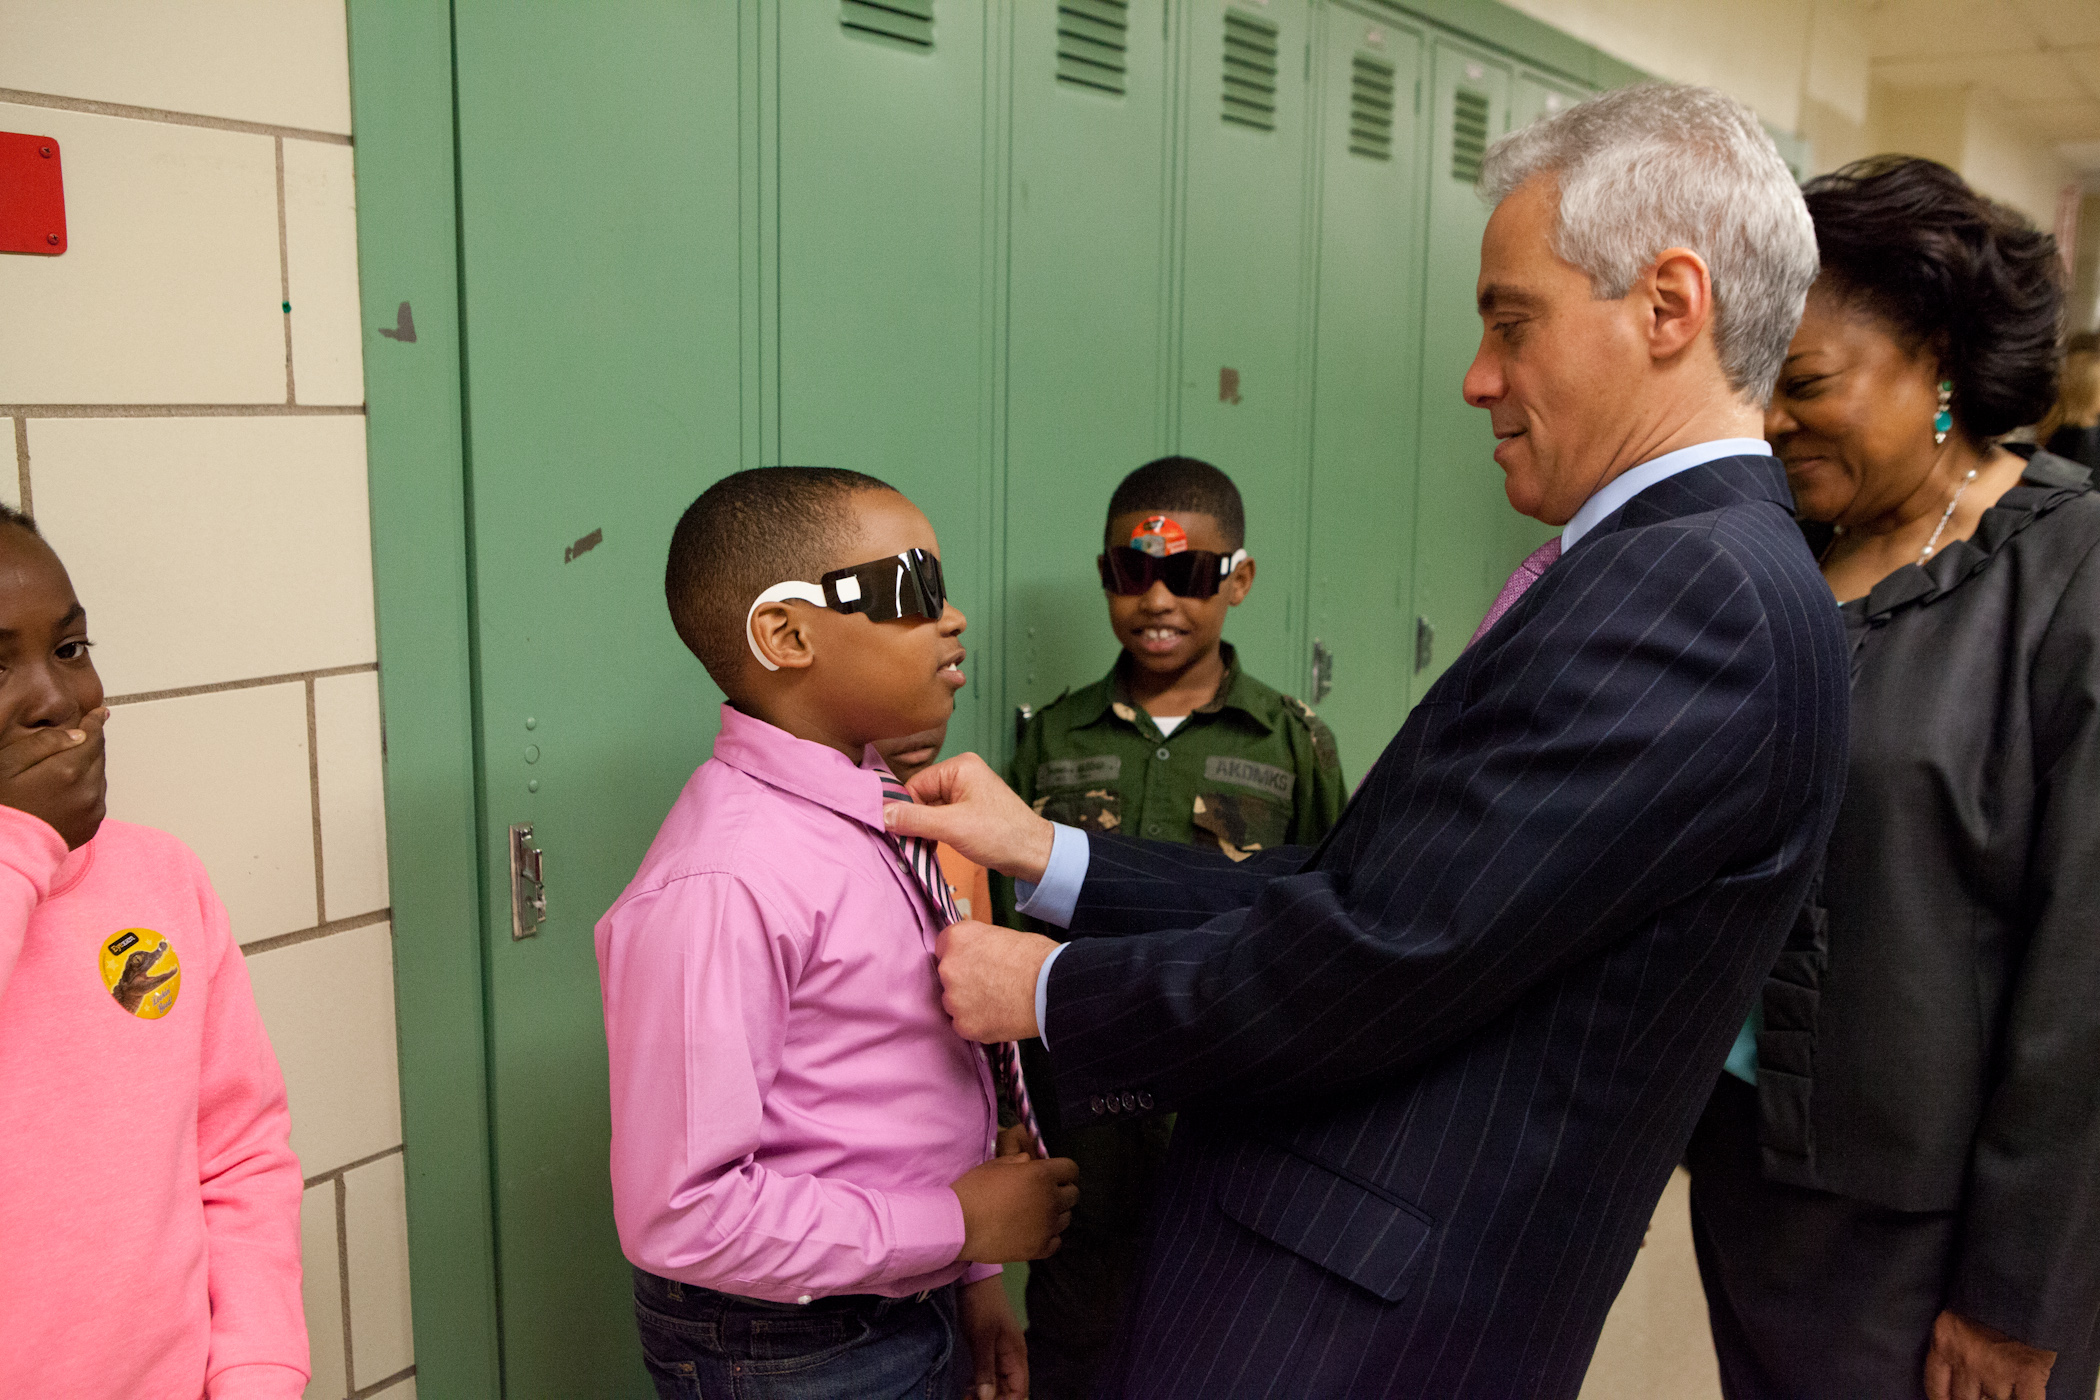 Mayor Emanuel visits with students receiving free vision exams at Sumner Elementary school